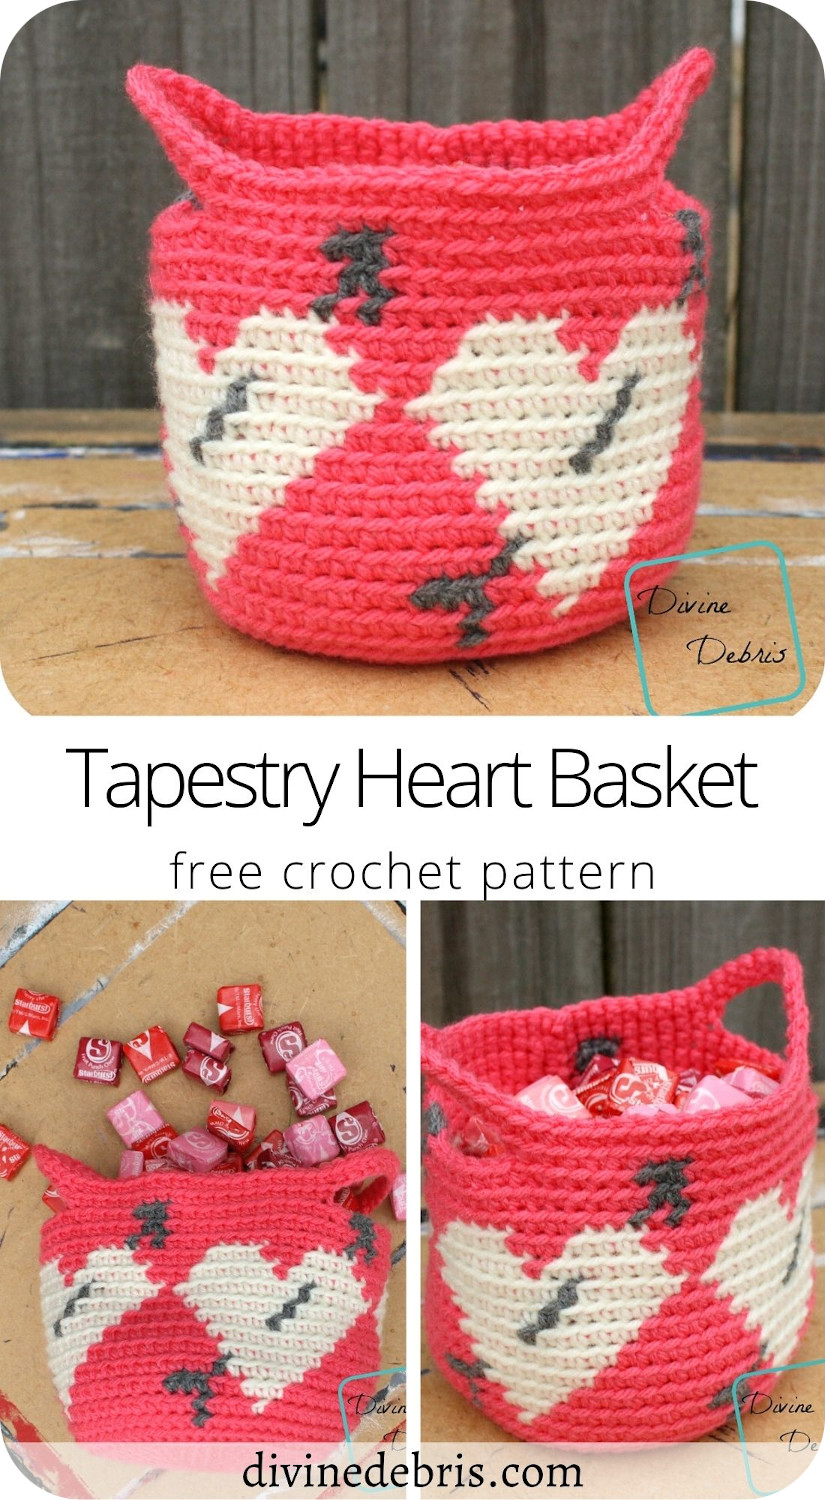 Learn how to make the Tapestry Heart Basket from a free crochet pattern on DivineDebris.com. Perfect for Valentine's day!